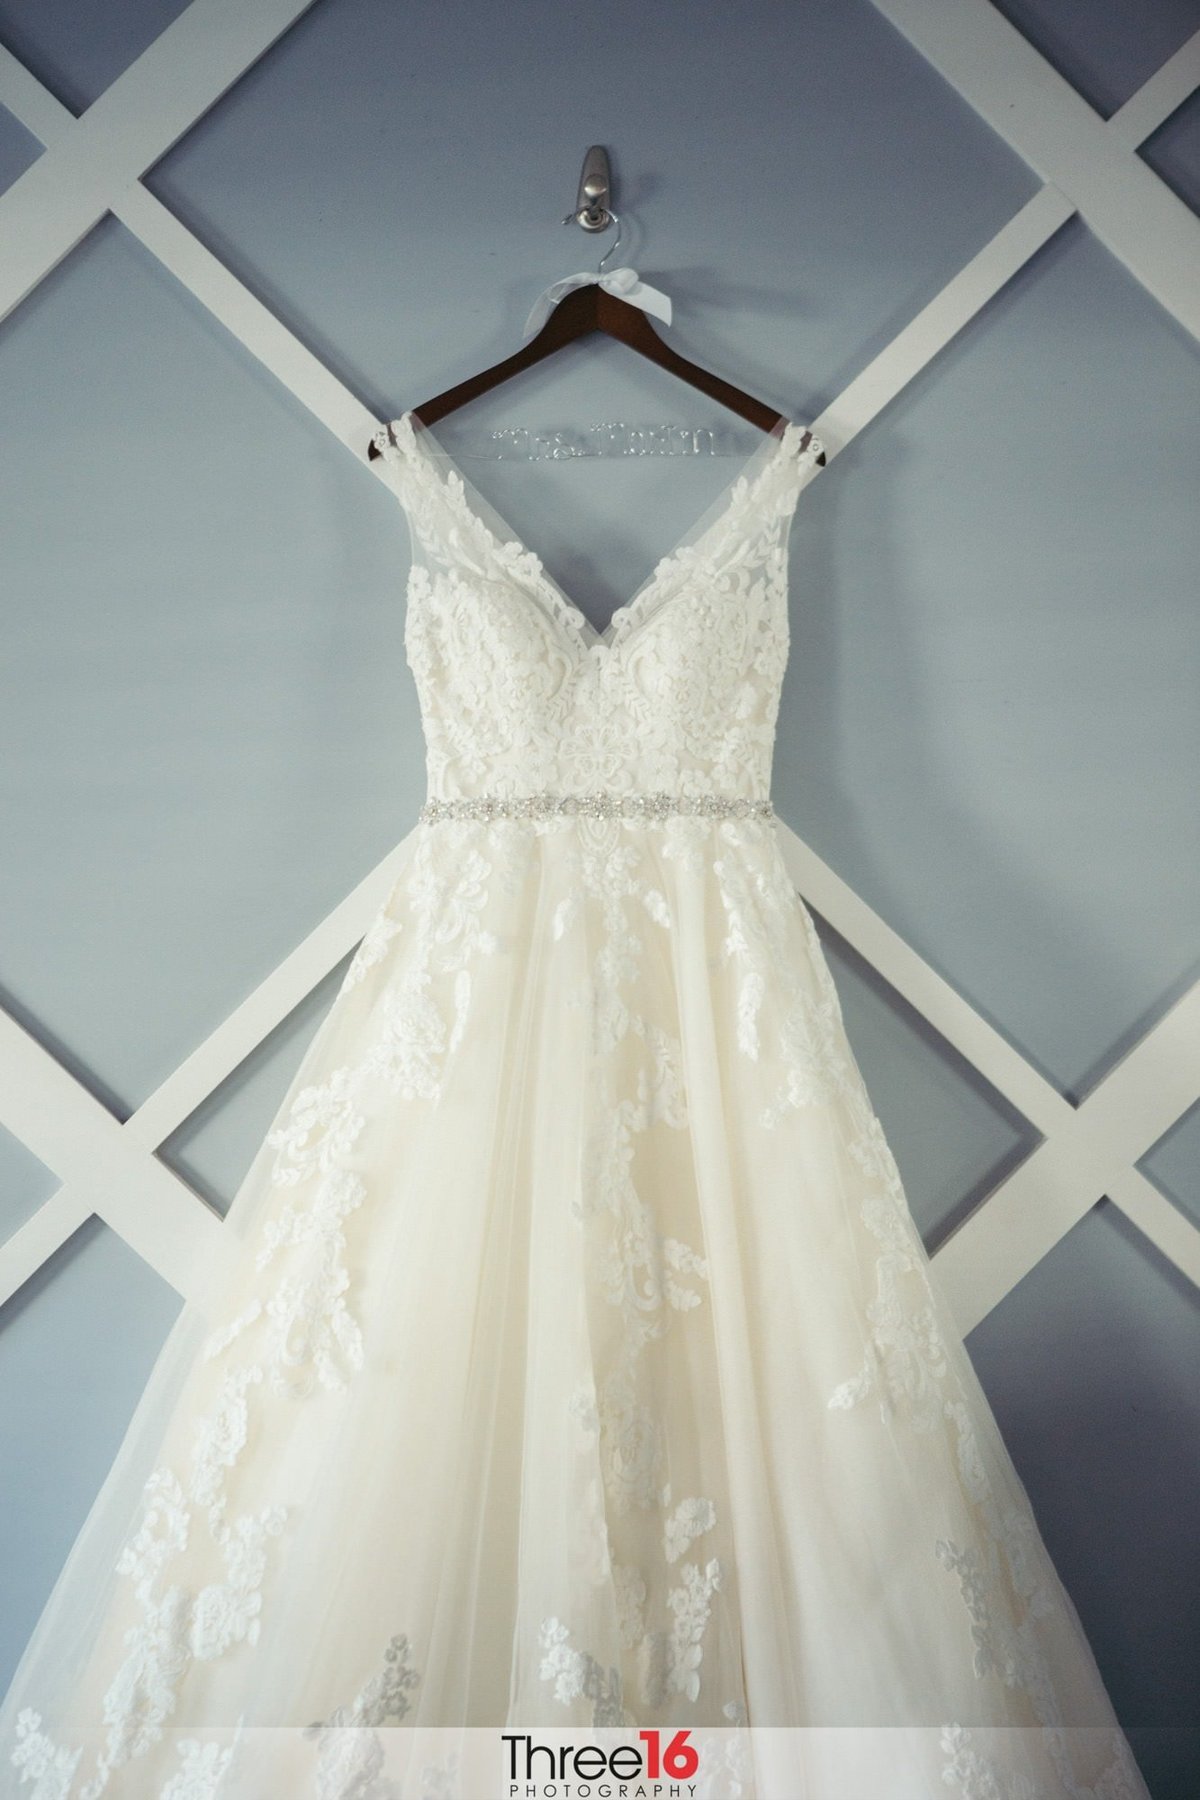 Gorgeous wedding gown hanging on display